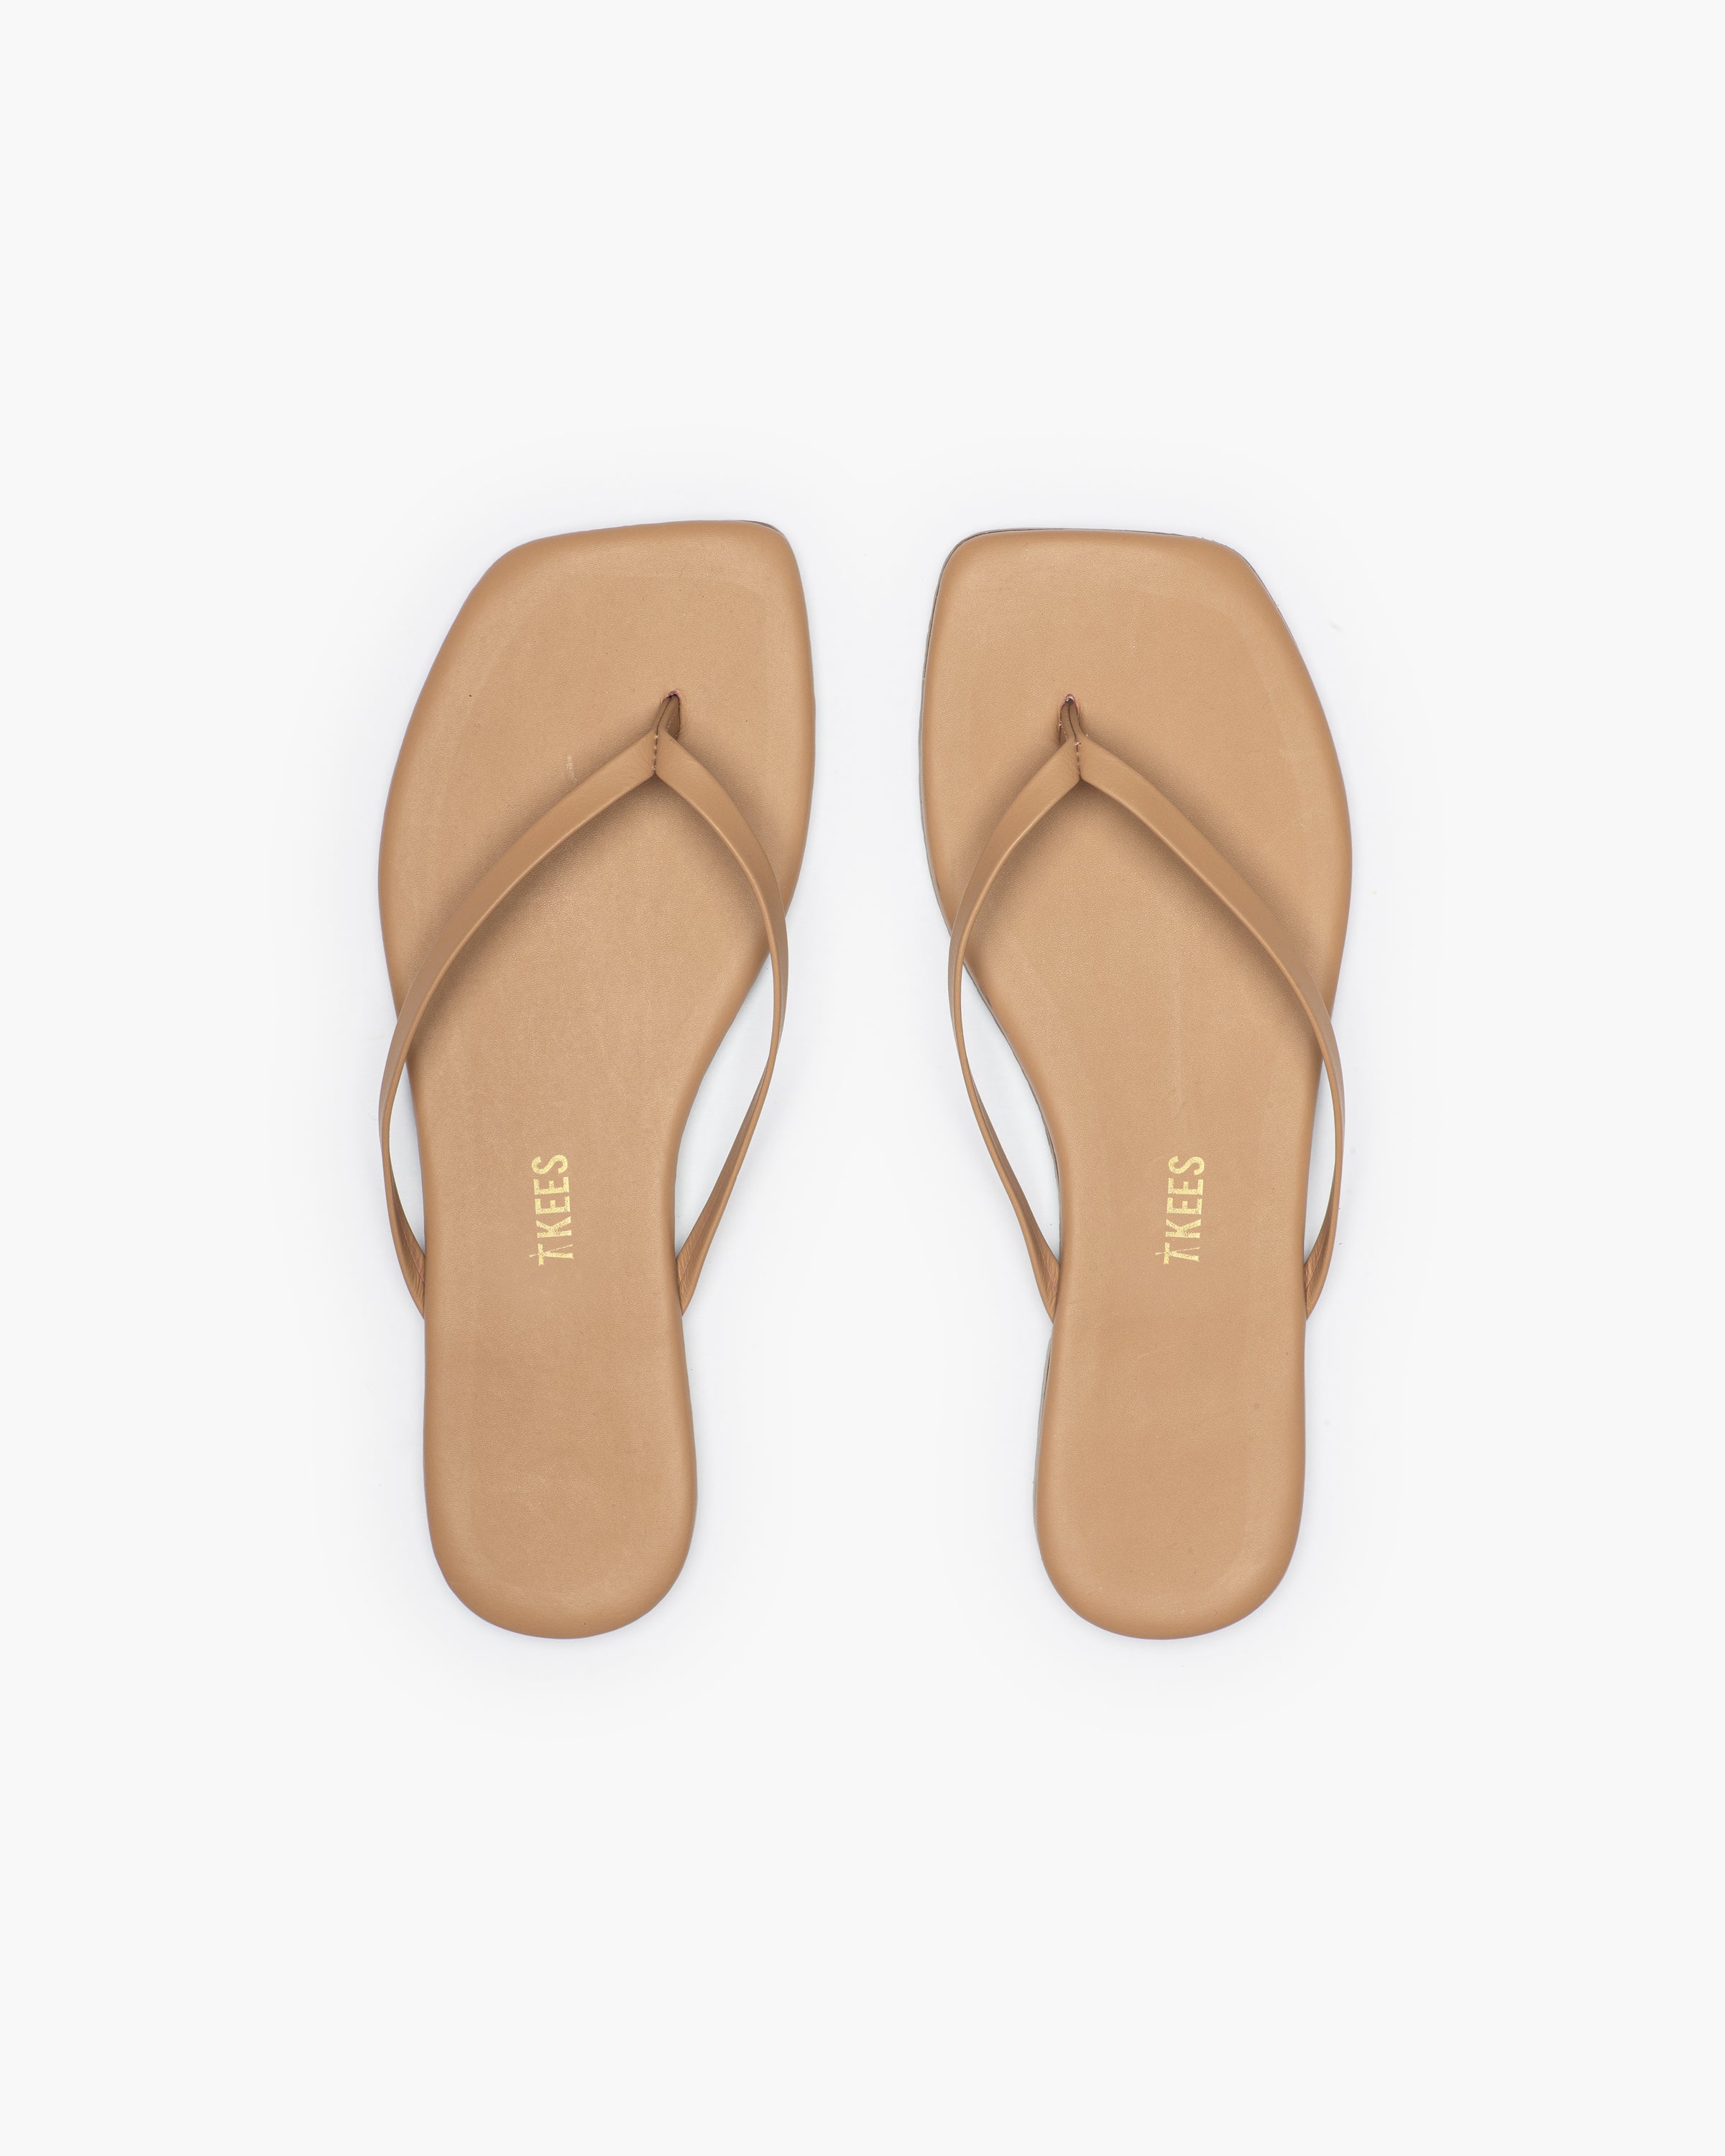 Square Toe Liri in Cocobutter | Women's Sandals | TKEES